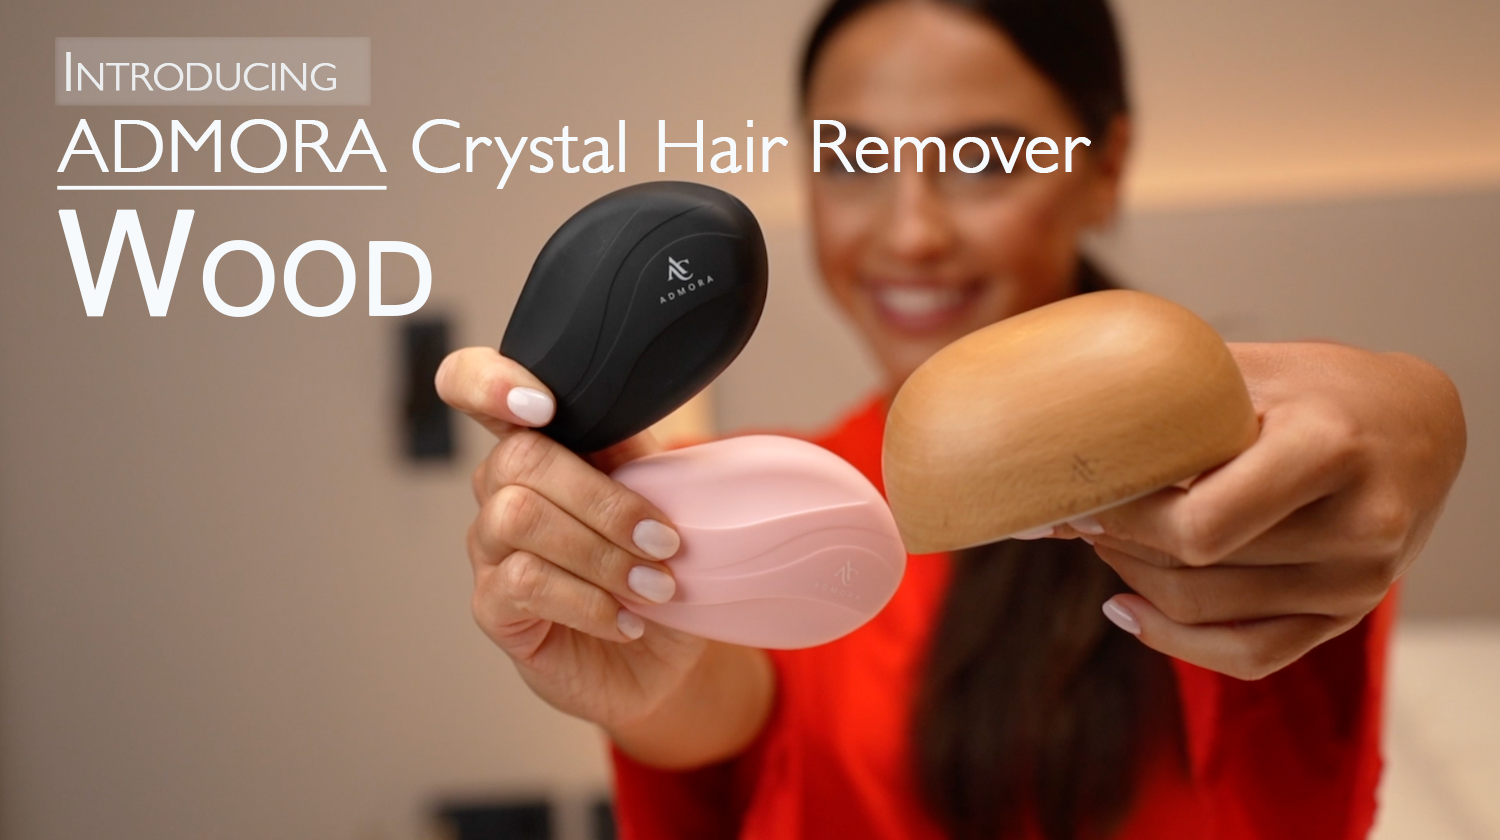 Load video: Admora Crystal Hair Remover